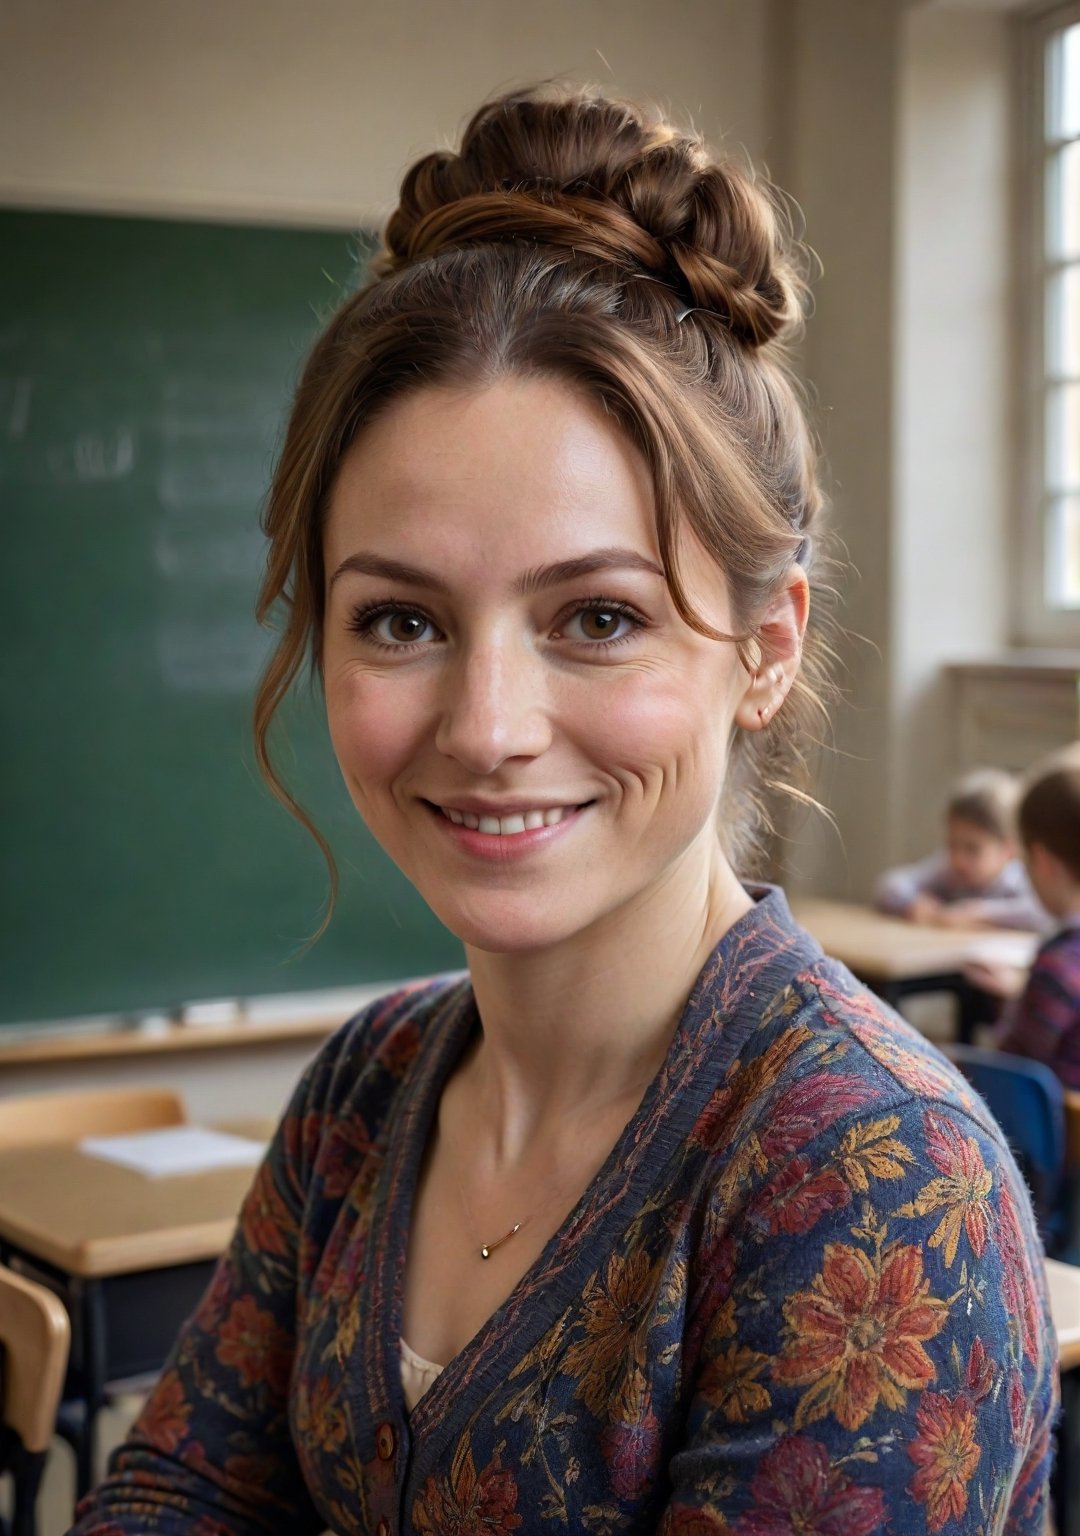 Elementary school view of a British teacher, 34 years old, embodying a nurturing spirit and educational dedication, with a petite, slightly rounded build, and a friendly face that includes a noticeable squint in one eye, in a vibrant London classroom. She's conducting a lesson, her gestures animated and inclusive, her smile gentle yet slightly crooked, engaging her young students.

Her hair, a bun of unruly auburn locks, is both practical and whimsically messy, fitting for her creative teaching style. Her eyes, one squinting more than the other, sparkle with enthusiasm and kindness, her uneven smile warm and encouraging.

She wears a (comfortable, patterned dress) and a (colorful cardigan), her style cheerful and relatable. Her feet, in (sensible, flat shoes), move gracefully around the classroom, her presence a blend of educational passion and a nurturing, inclusive approach.
(skin blemishes), 8k uhd, dslr, soft lighting, high quality, film grain, Fujifilm XT3, high quality photography, 3 point lighting, flash with softbox, 4k, Canon EOS R3, hdr, smooth, sharp focus, high resolution, award winning photo, 80mm, f2.8, bokeh, (Highest Quality, 4k, masterpiece, Amazing Details:1.1), film grain, Fujifilm XT3, photography,
(imperfect skin), detailed eyes, epic, dramatic, fantastical, full body, intricate design and details, dramatic lighting, hyperrealism, photorealistic, cinematic, 8k, detailed face. Extremely Realistic, art by sargent, PORTRAIT PHOTO, Aligned eyes, Iridescent Eyes, (blush, eye_wrinkles:0.6), (goosebumps:0.5), subsurface scattering, ((skin pores)), (detailed skin texture), (( textured skin)), realistic dull (skin noise), visible skin detail, skin fuzz, dry skin, hyperdetailed face, sharp picture, sharp detailed, (((analog grainy photo vintage))), Rembrandt lighting, ultra focus, illuminated face, detailed face, 8k resolution
,photo r3al,Extremely Realistic,aw0k euphoric style,PORTRAIT PHOTO,Enhanced Reality